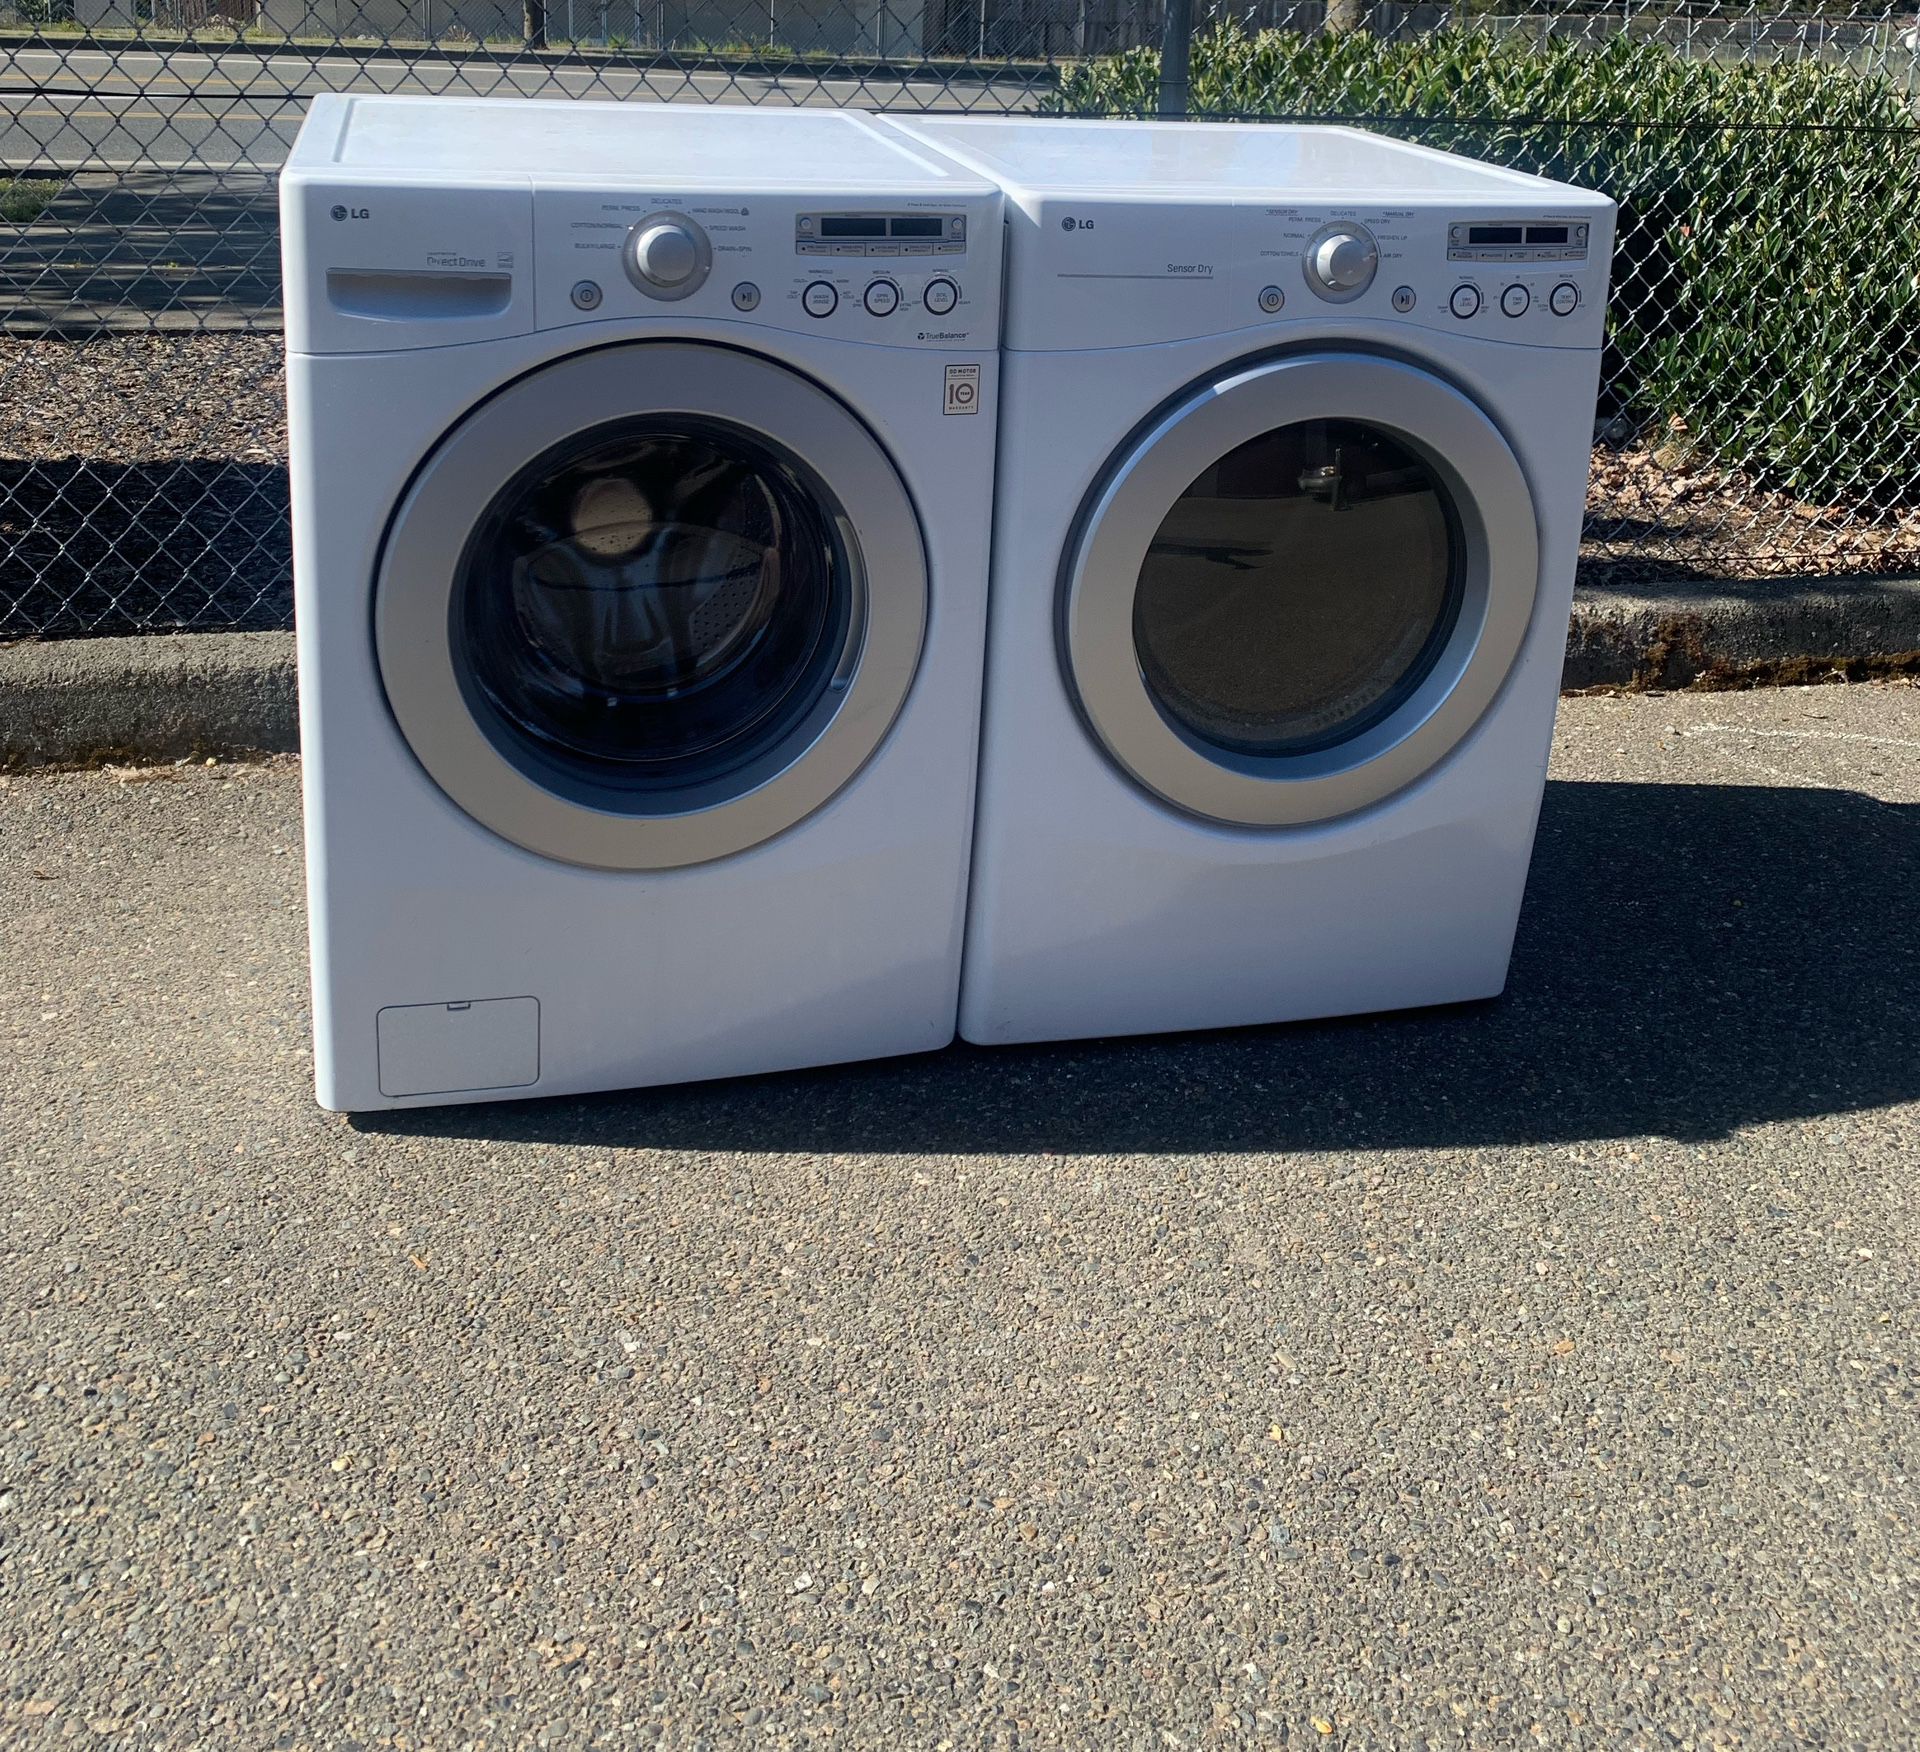 LG WASHER AND DRYER SET.